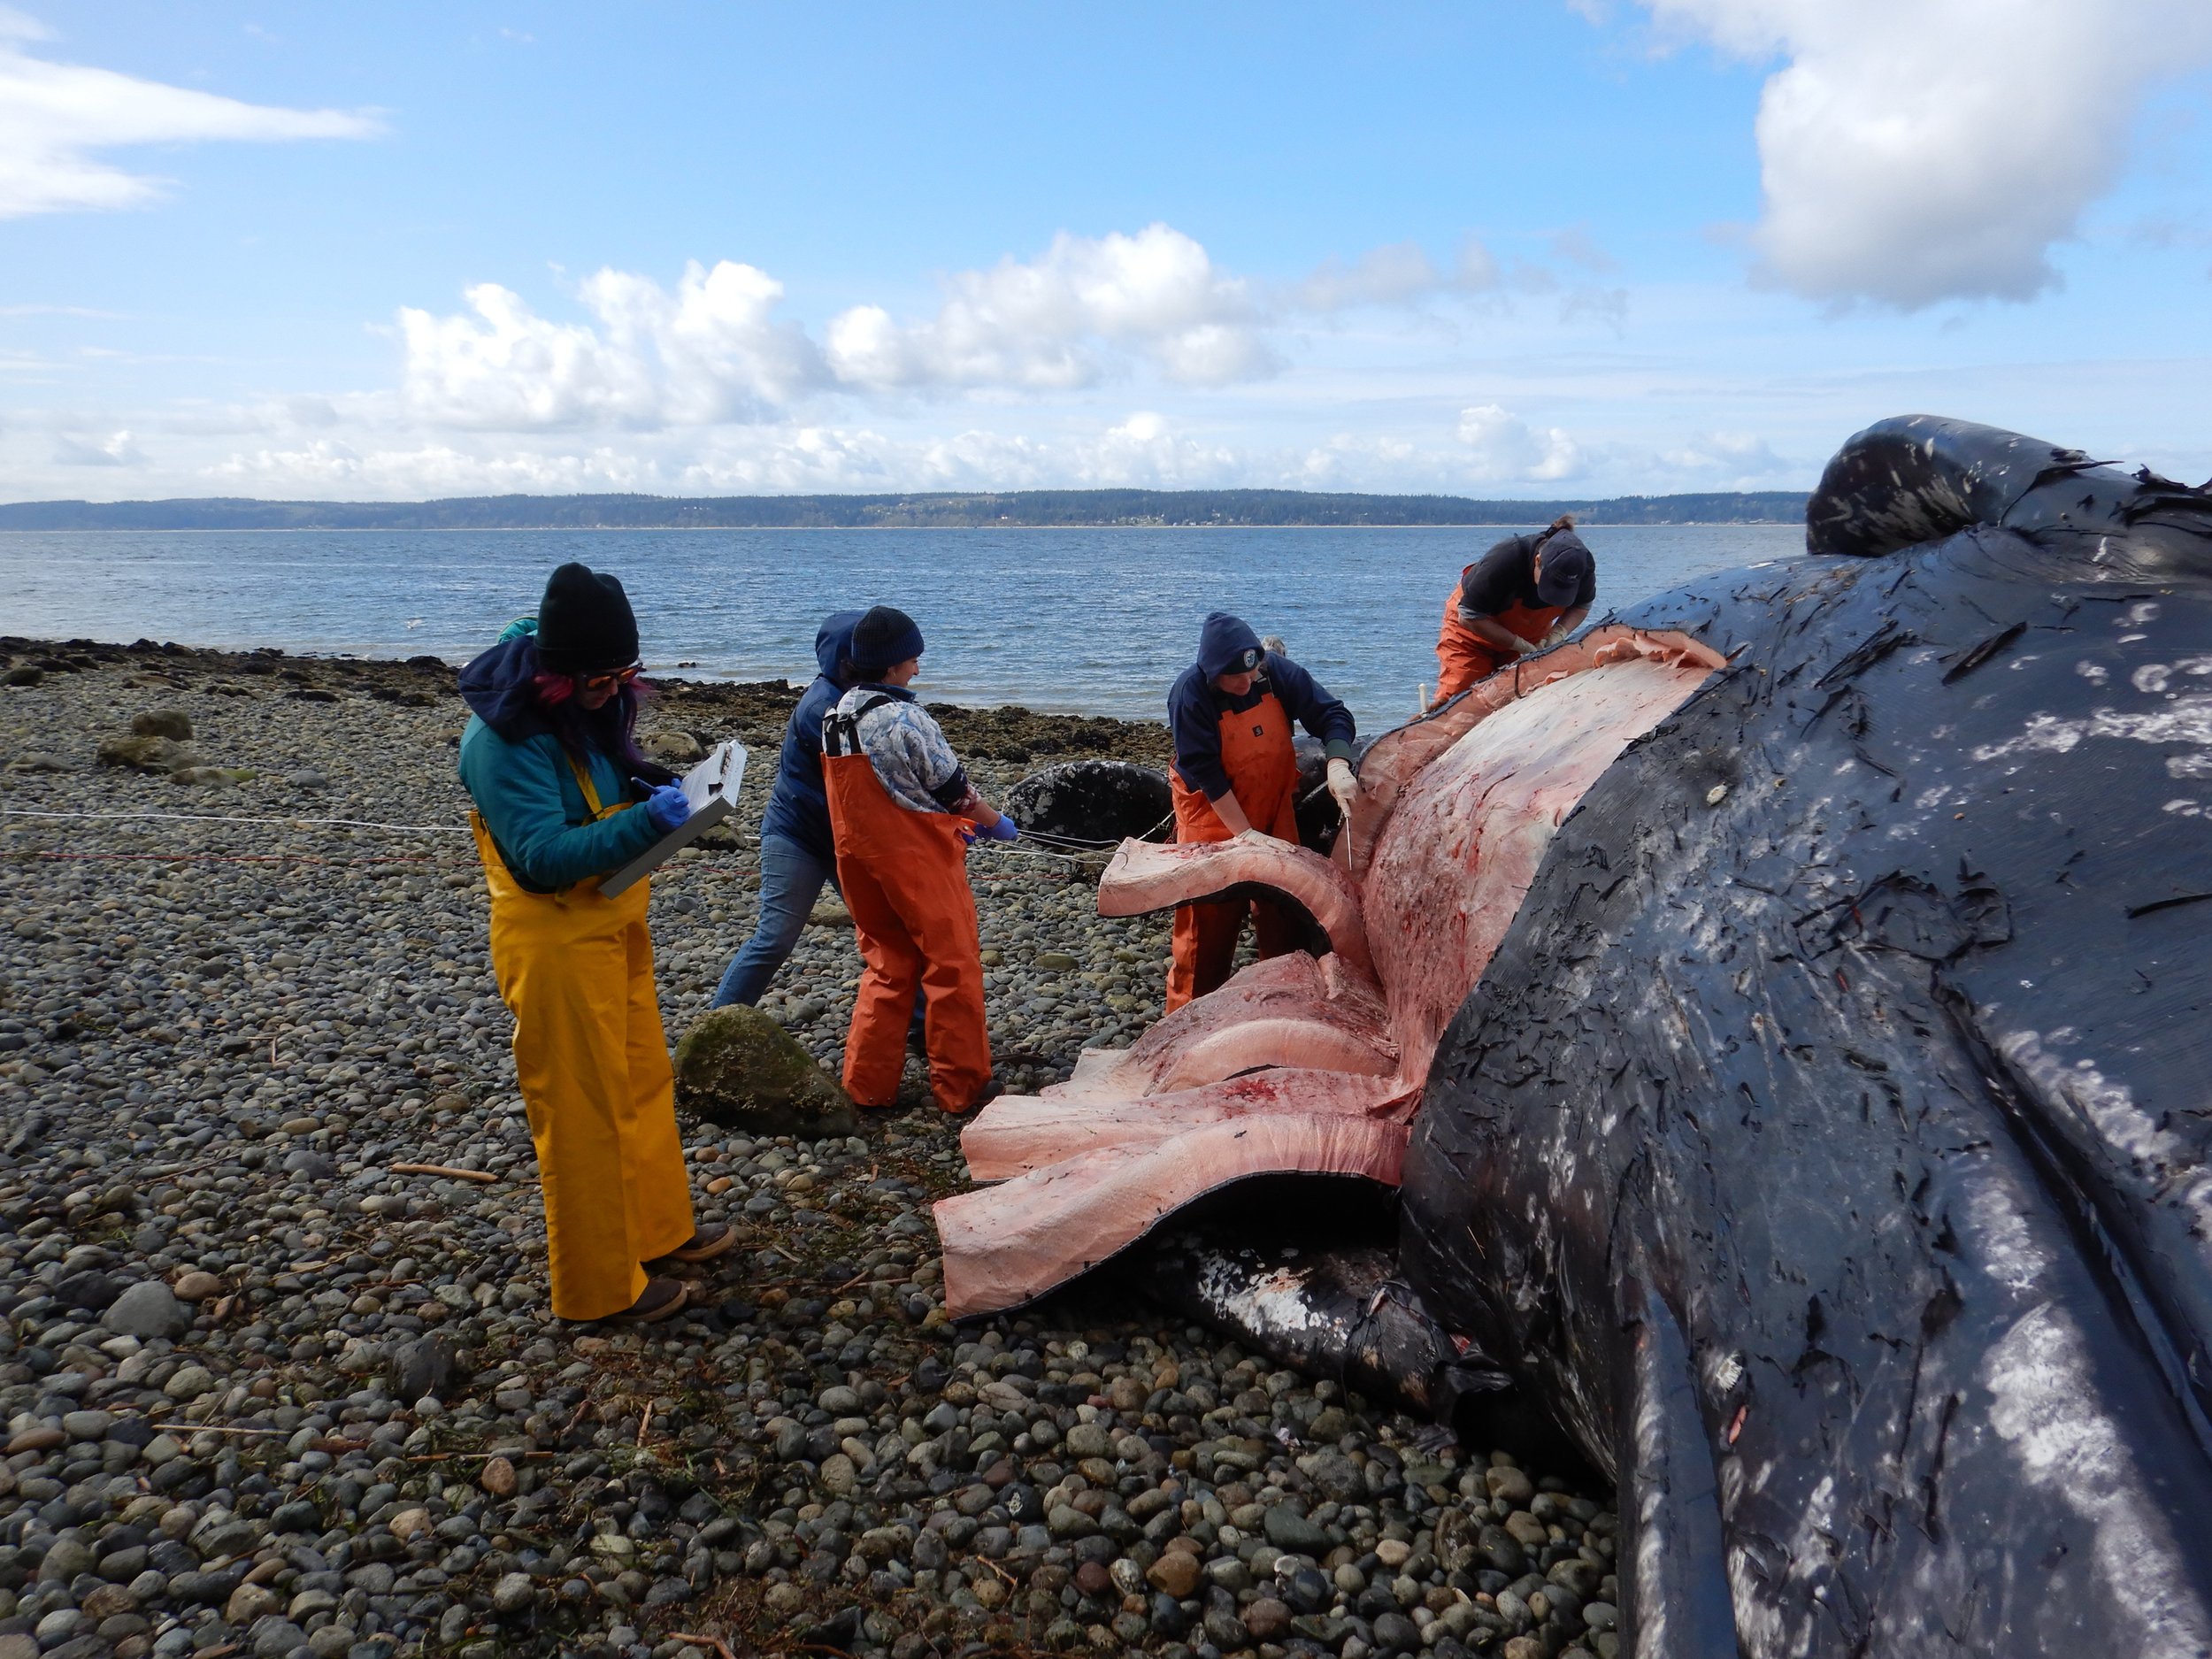 Malnutrition, ship strikes likely cause of spate of whale strandings